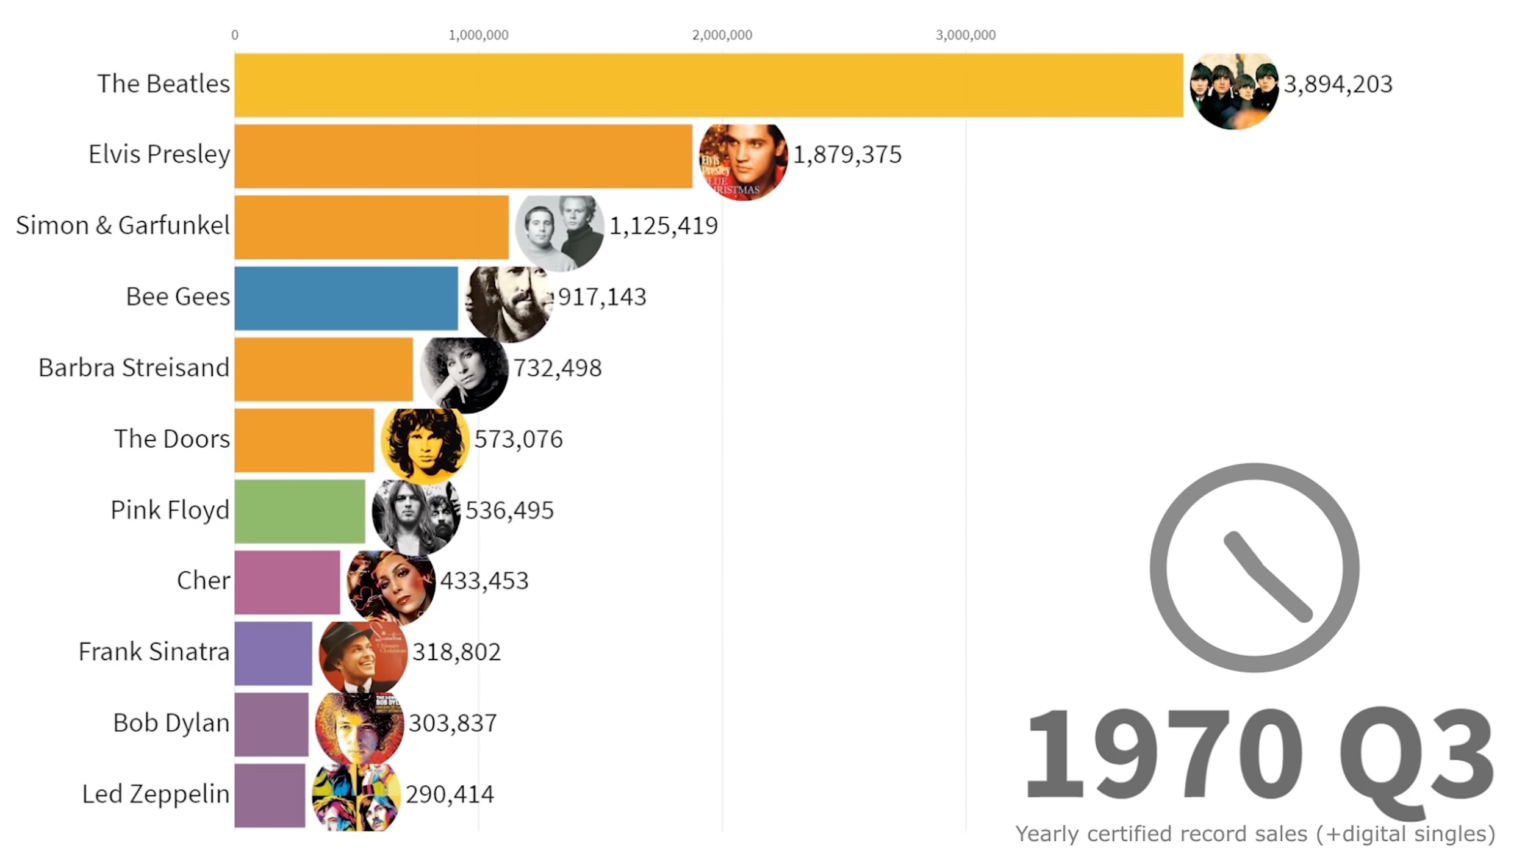 A Visualization Of The BestSelling Music Artists from 1969 to 2019